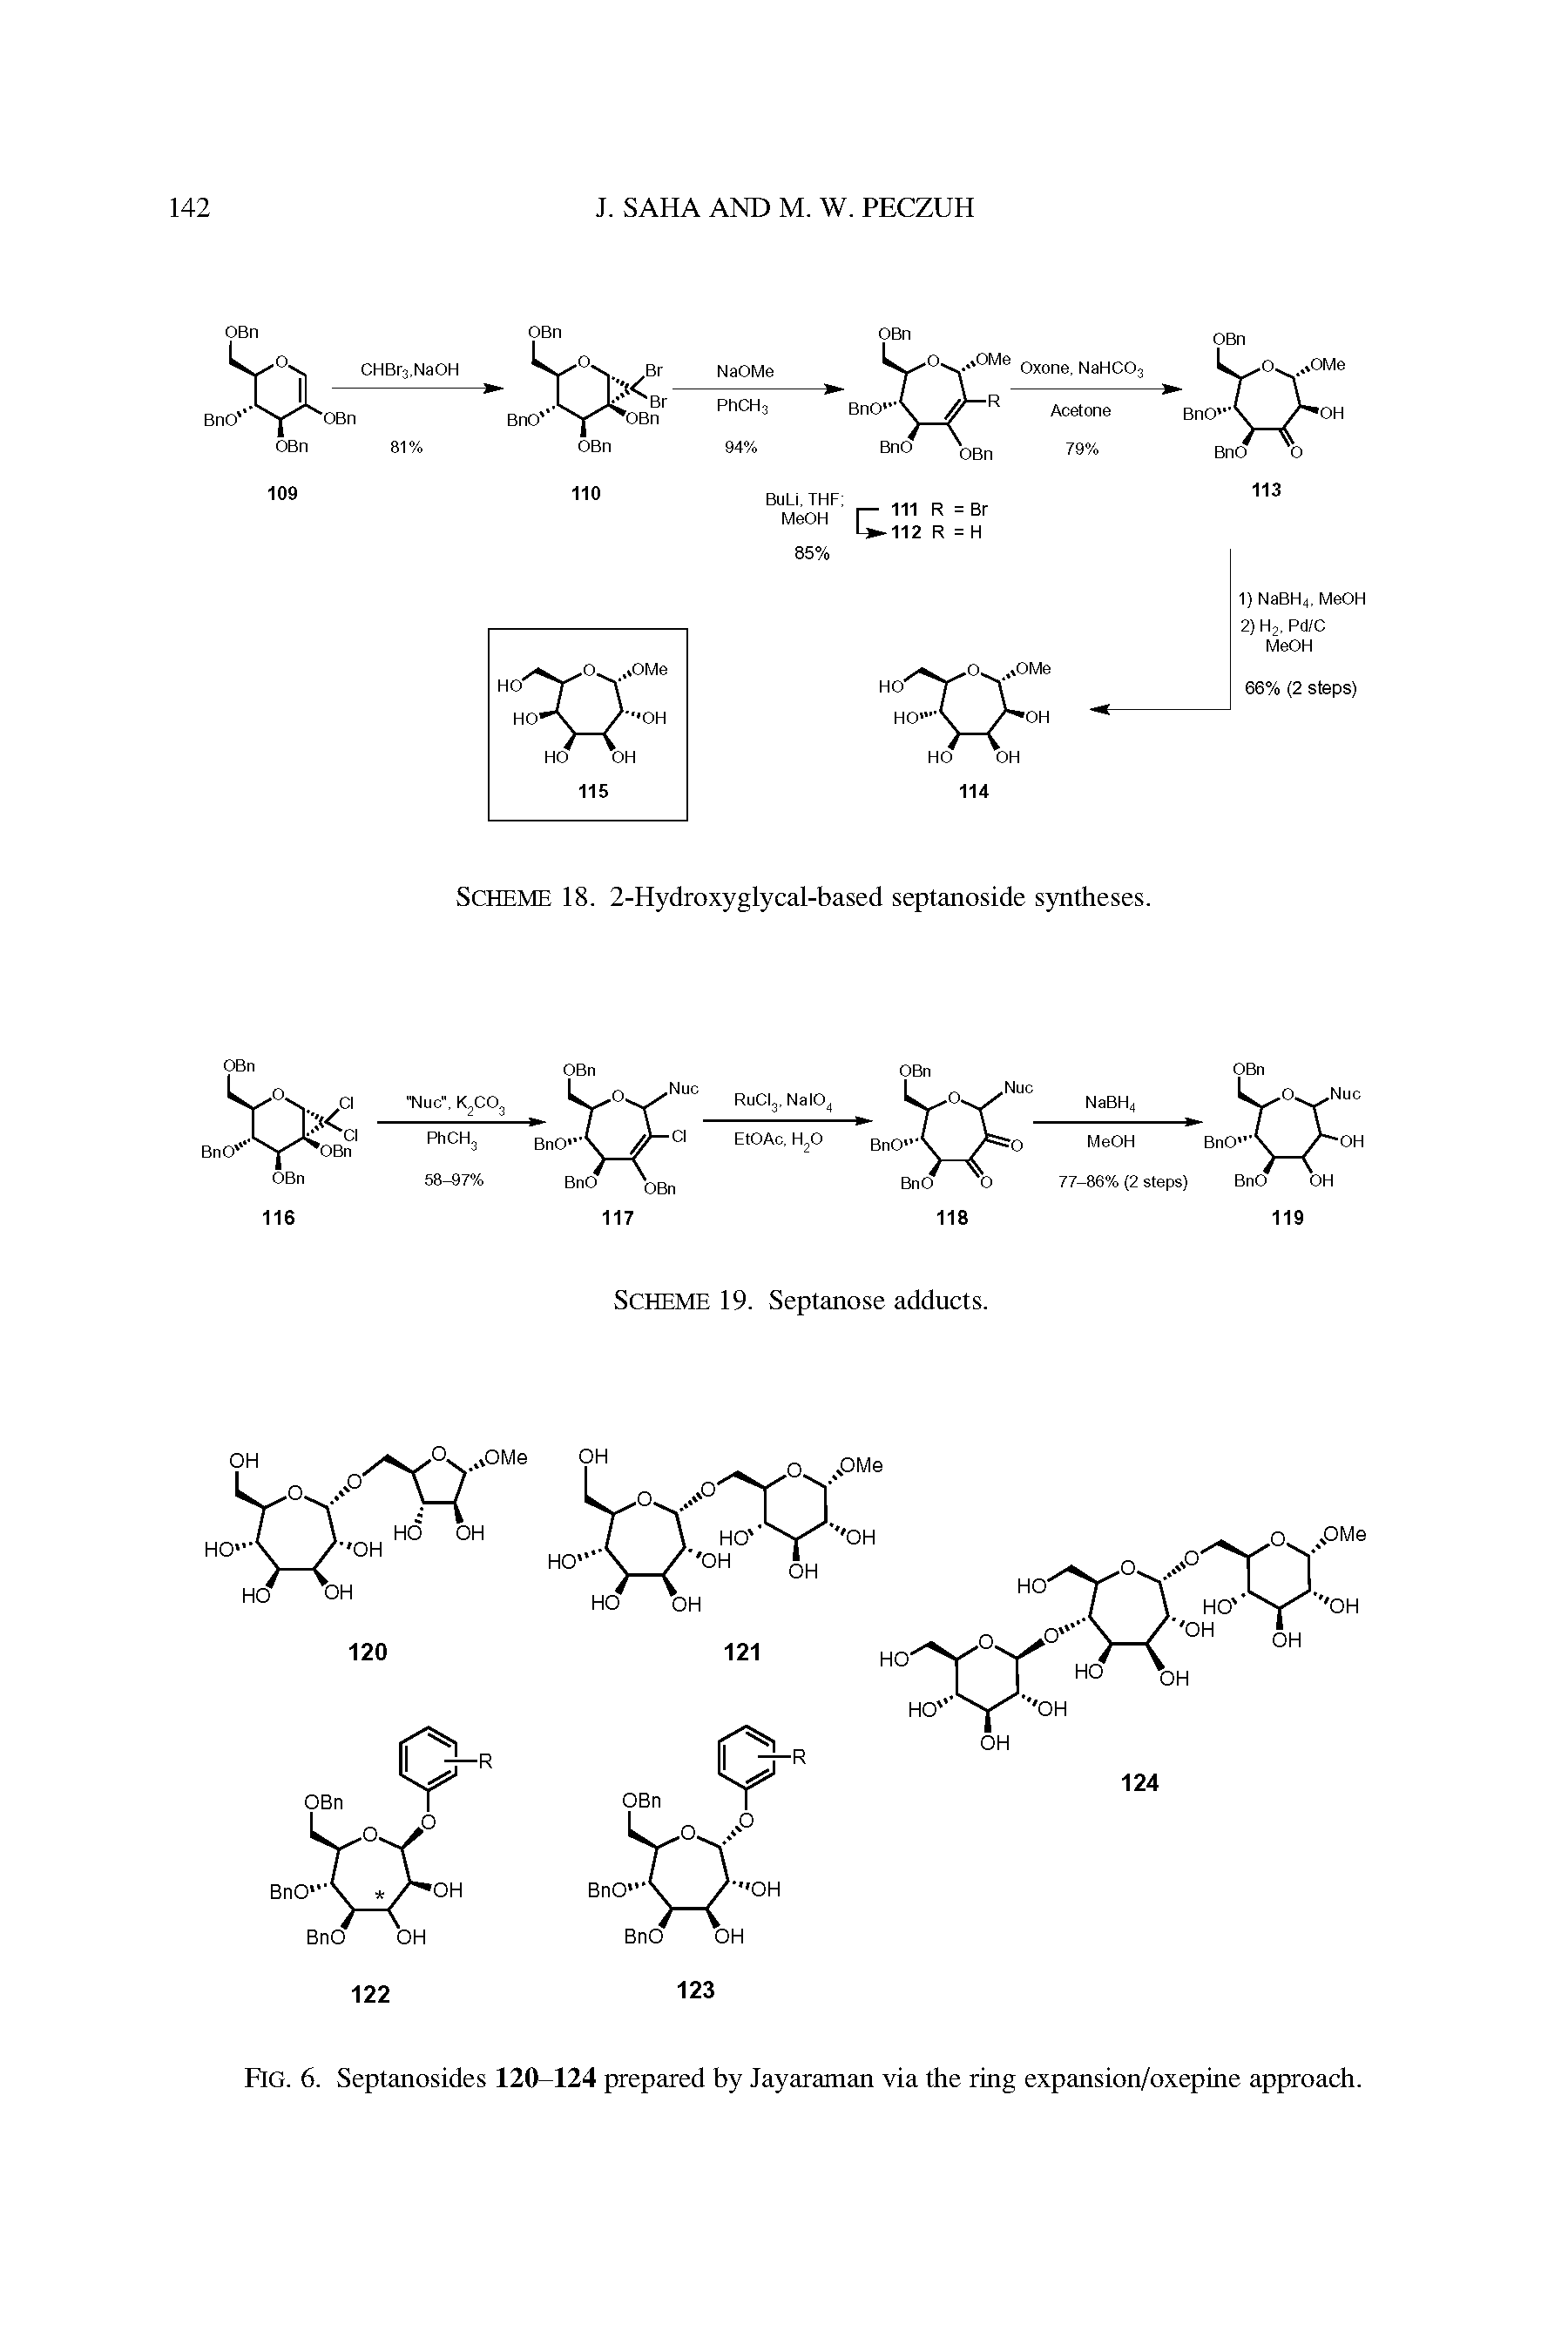 Fig. 6. Septanosides 120-124 prepared by Jayaraman via the ring expansion/oxepine approach.